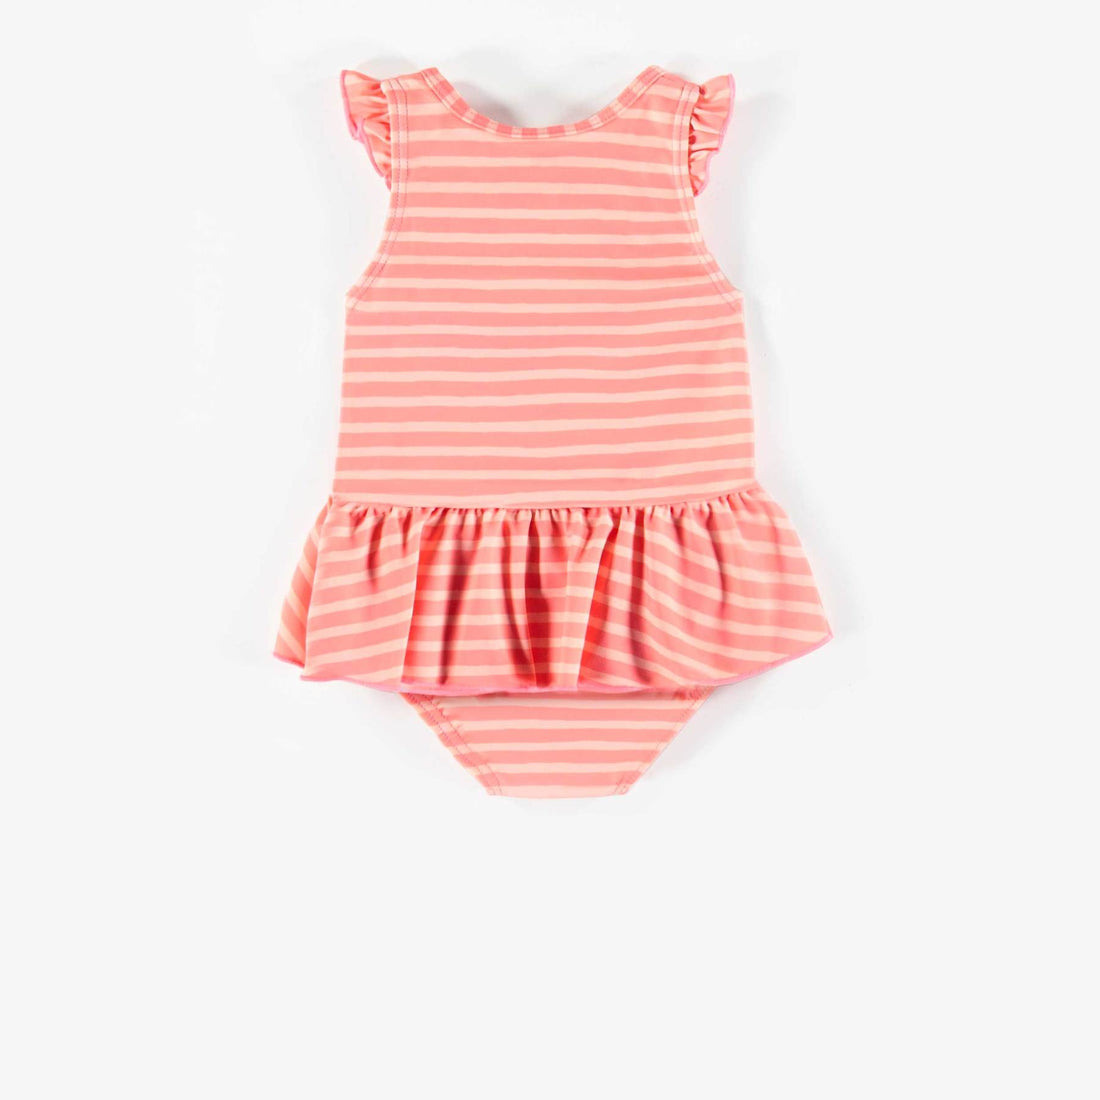 PINK STRIPED ONE-PIECE SWIMSUIT, BABY GIRL